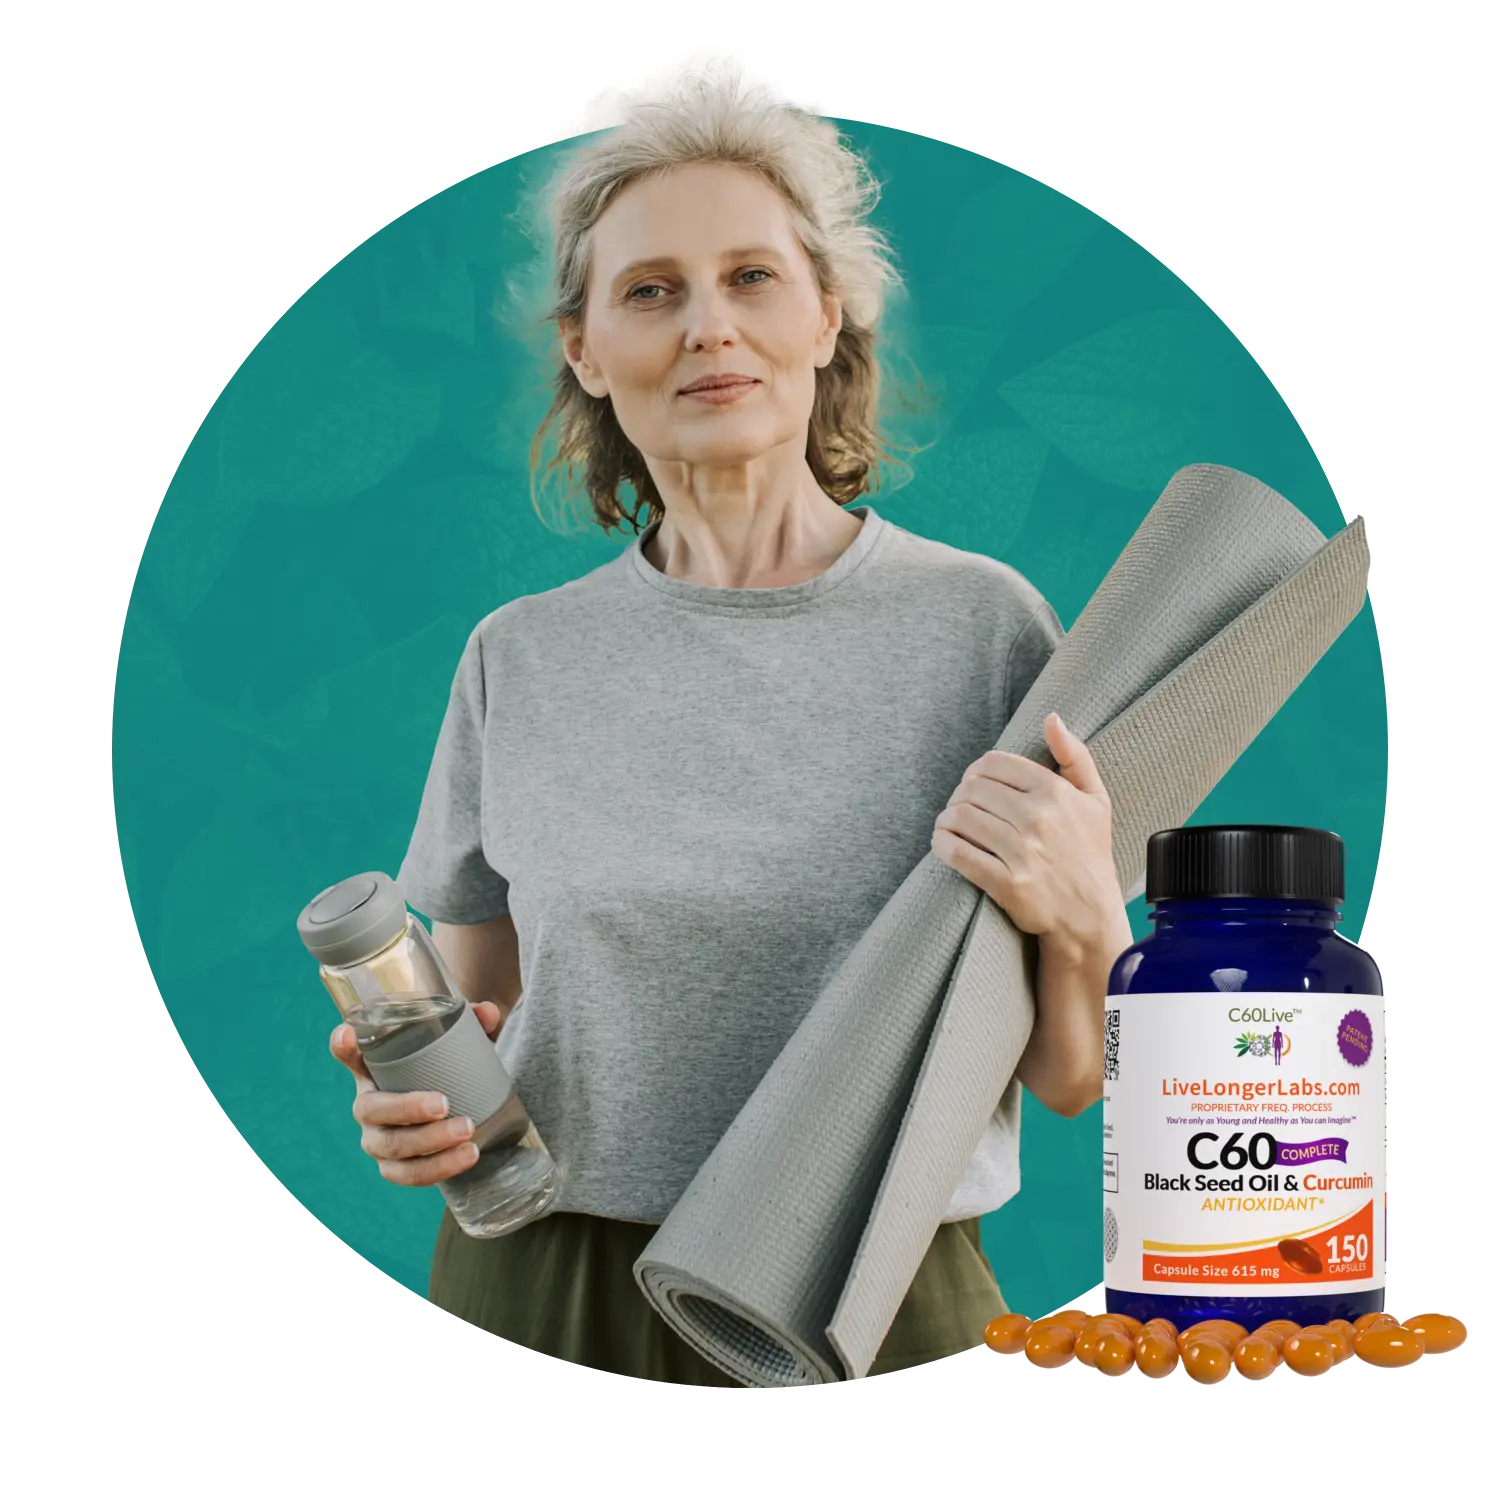 A senior woman is holding a gray yoga mat on her left hand and a gray tea bottle infuser on her right hand with an image of a C60 Complete bottle placed in front of her image.